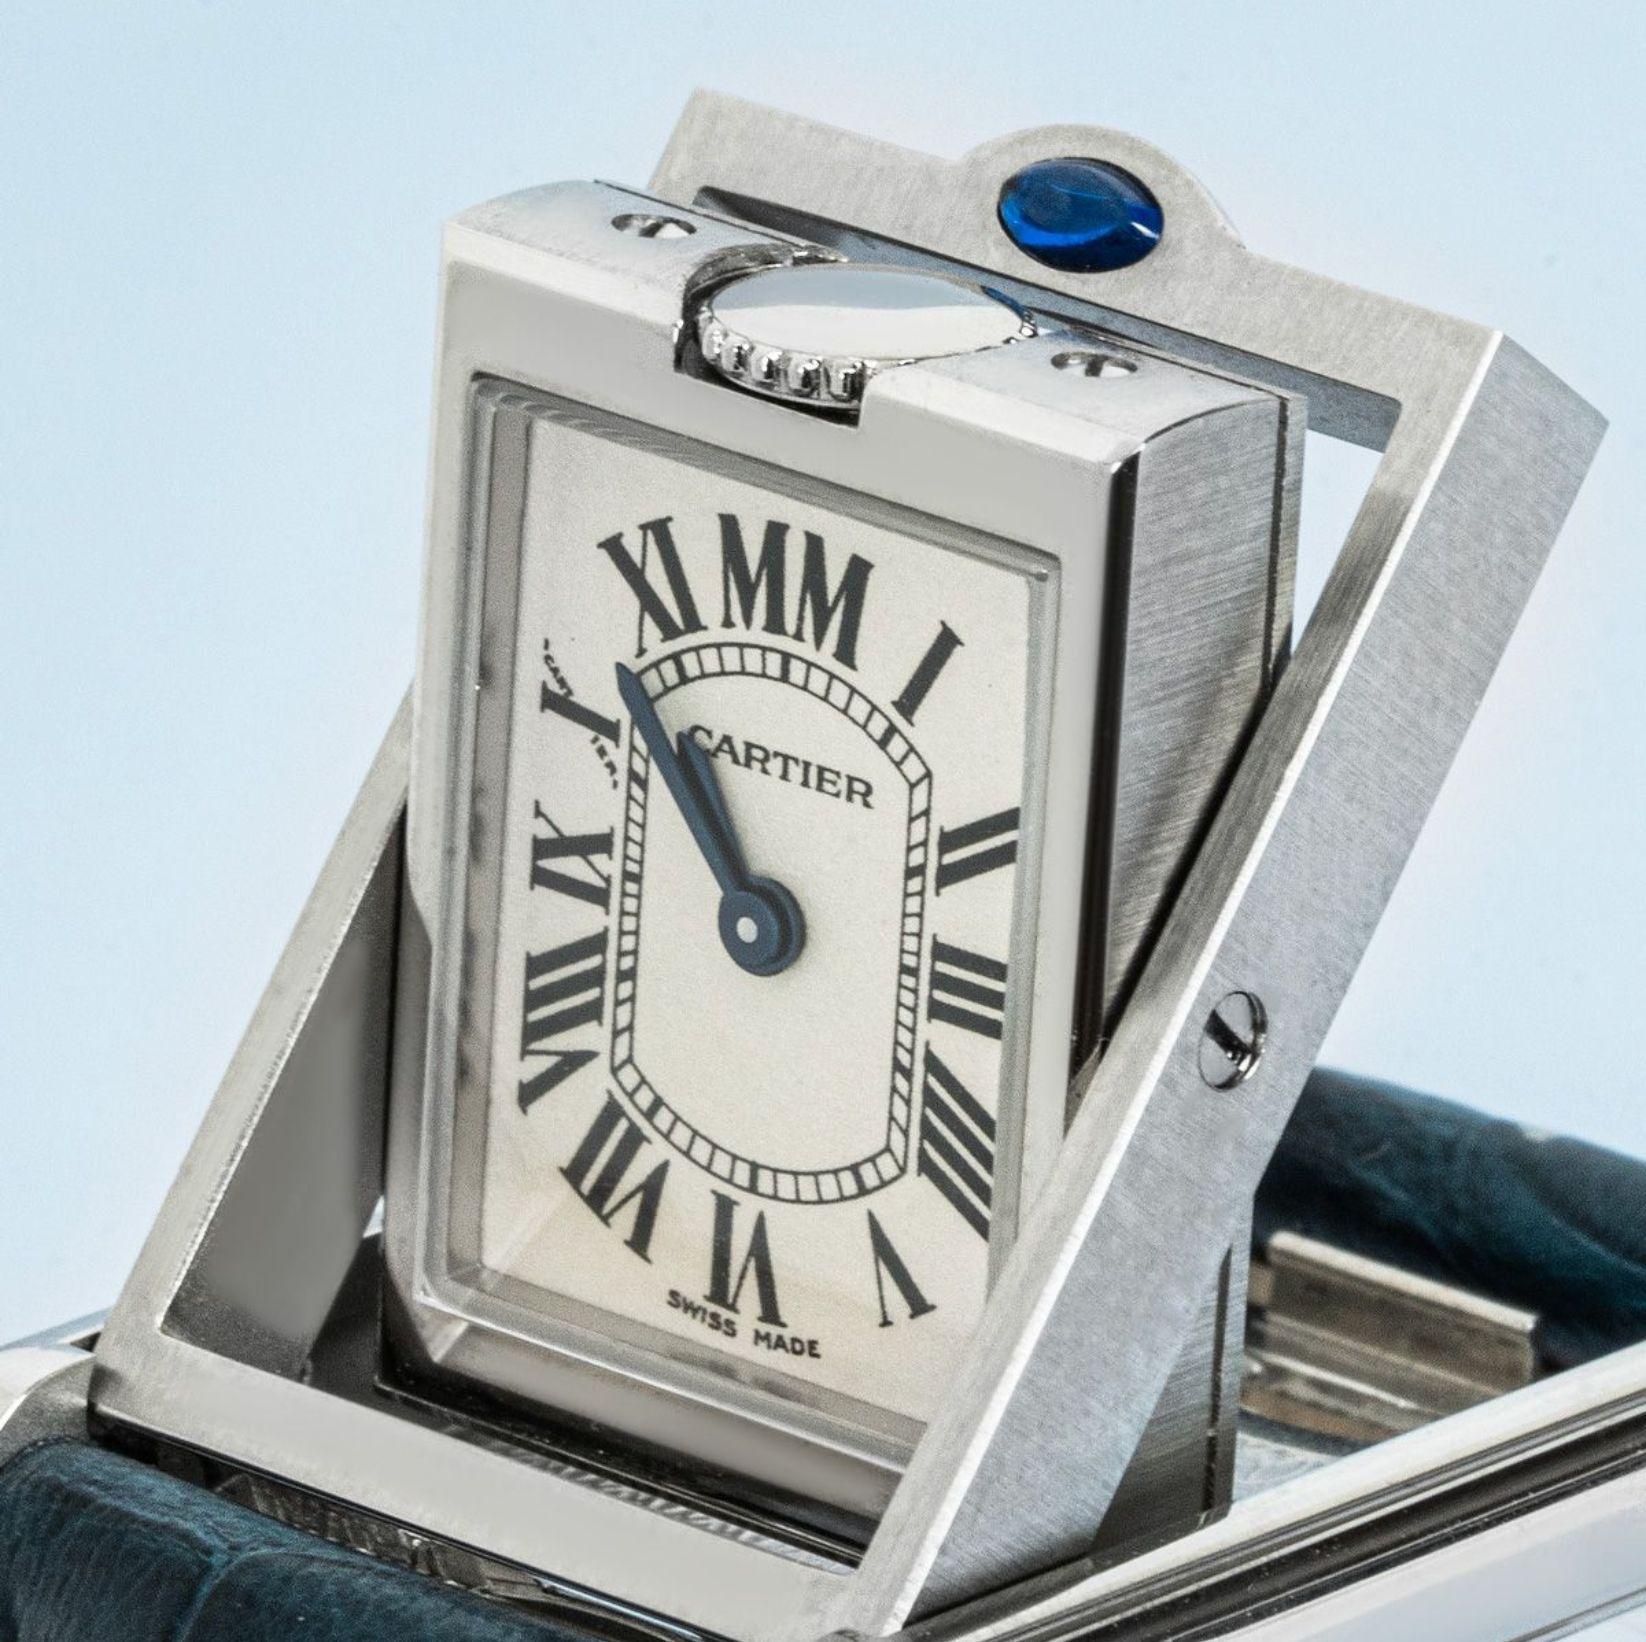 A 22mm stainless steel Tank Basculante by Cartier. Featuring a silver dial with roman numerals that features a distinctive MM at 12 o'clock, blued steeled sword-shaped hands, a secret Cartier signature at X and a stainless steel bezel. The watch